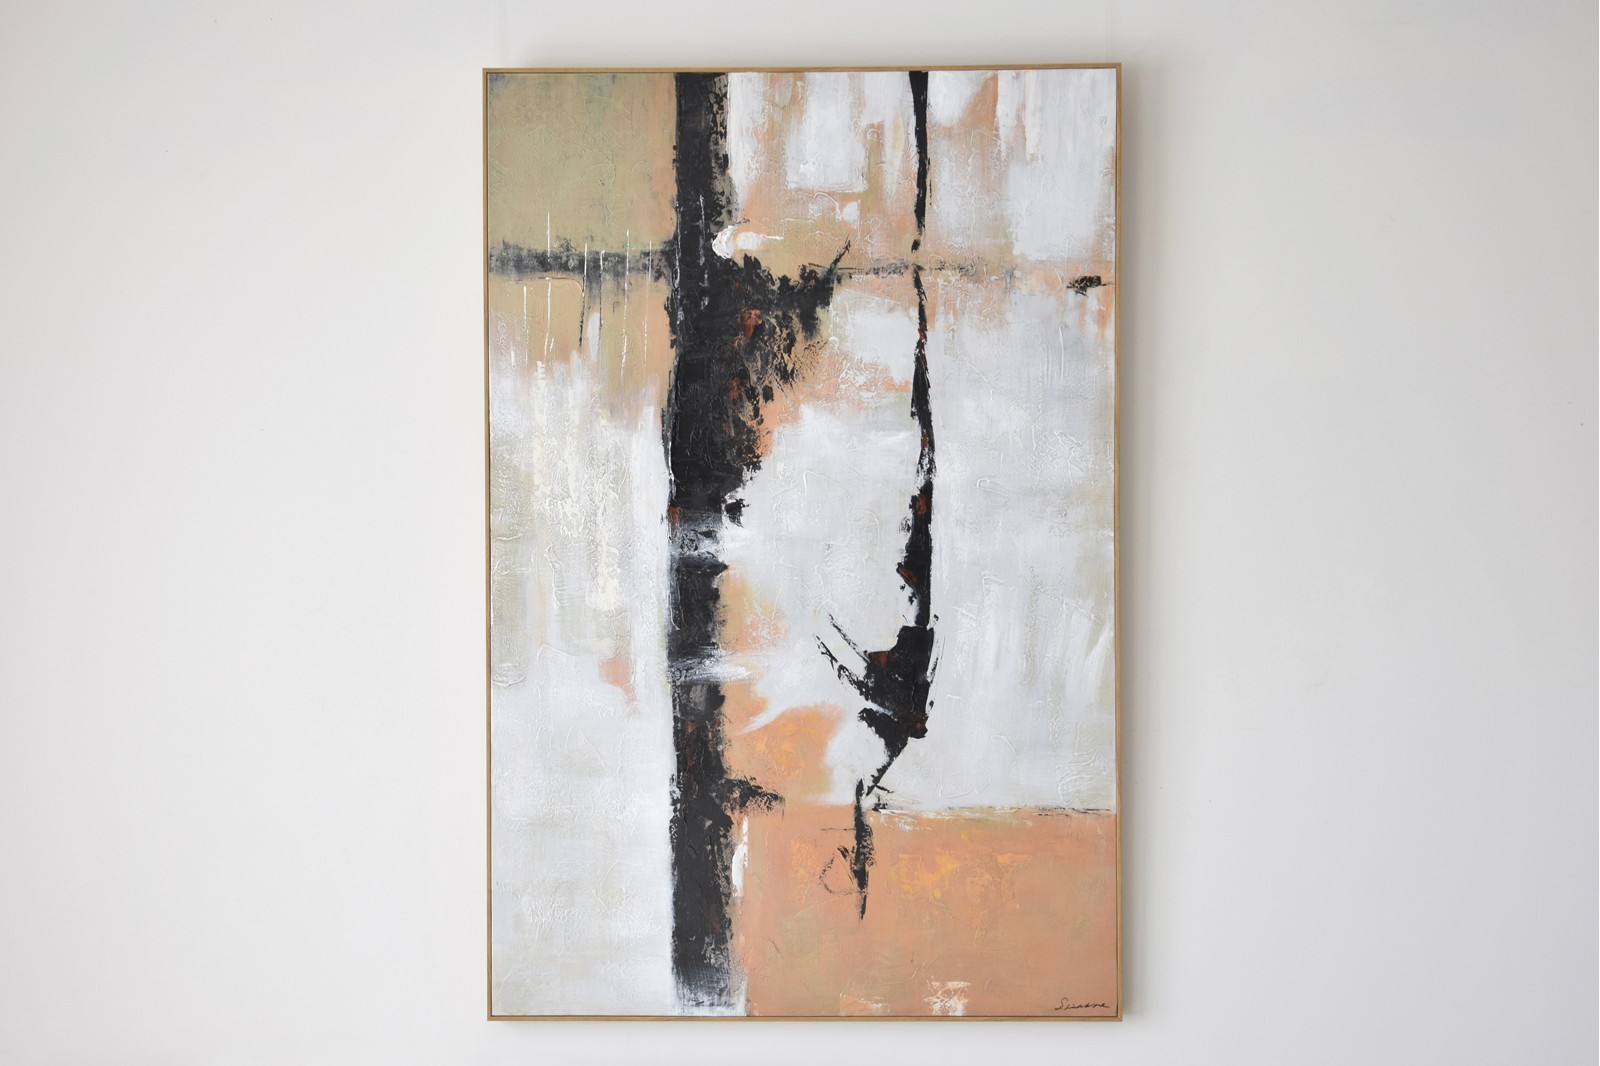 ABSTRACT PAINTING CHASM WITH FRAME